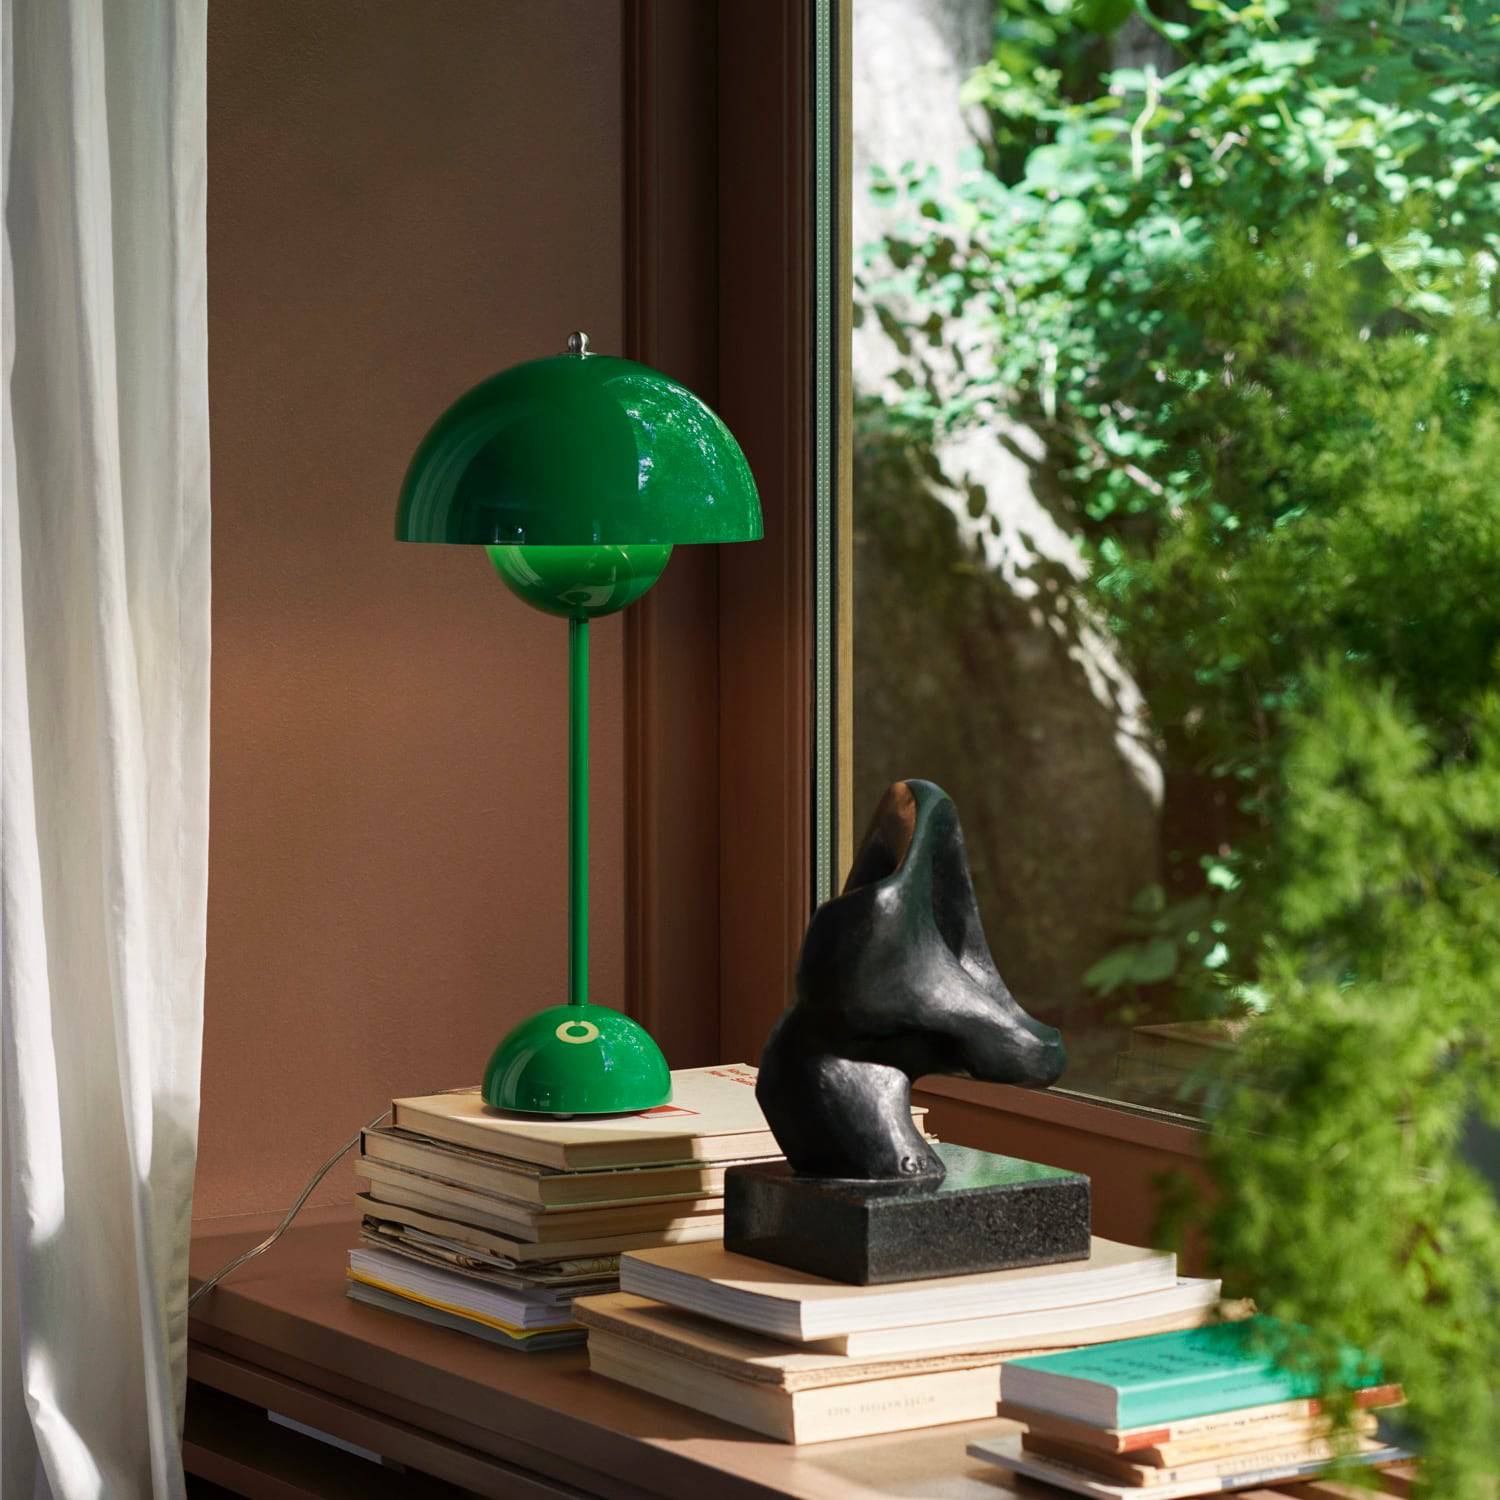 &Tradition Flowerpot VP3 Table Lamp Signal Green - KANSO#Color_Signal Green